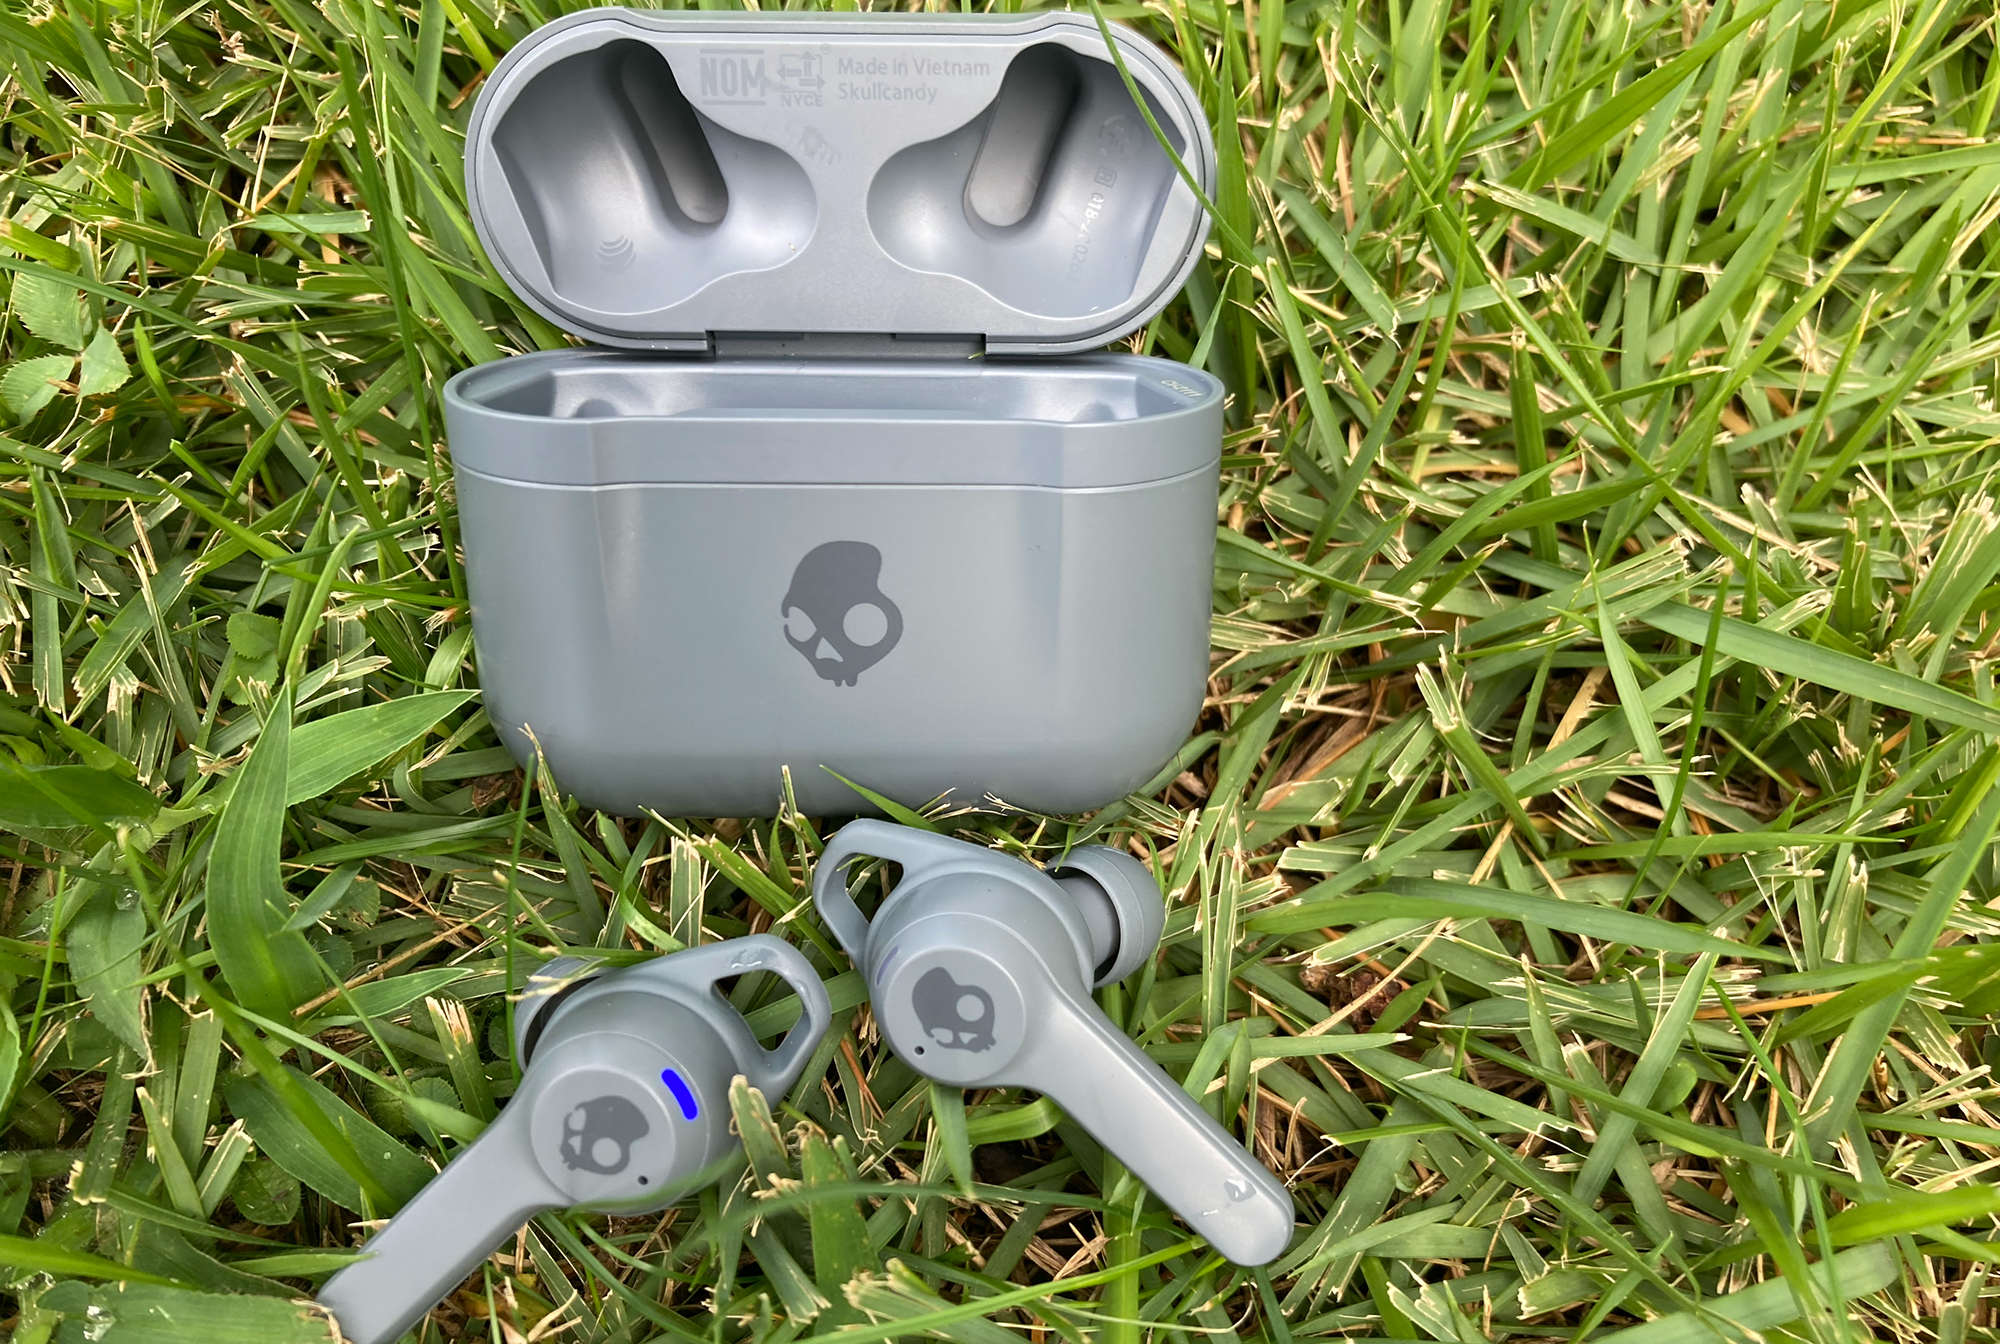 Skullcandy Indy ANC in the grass